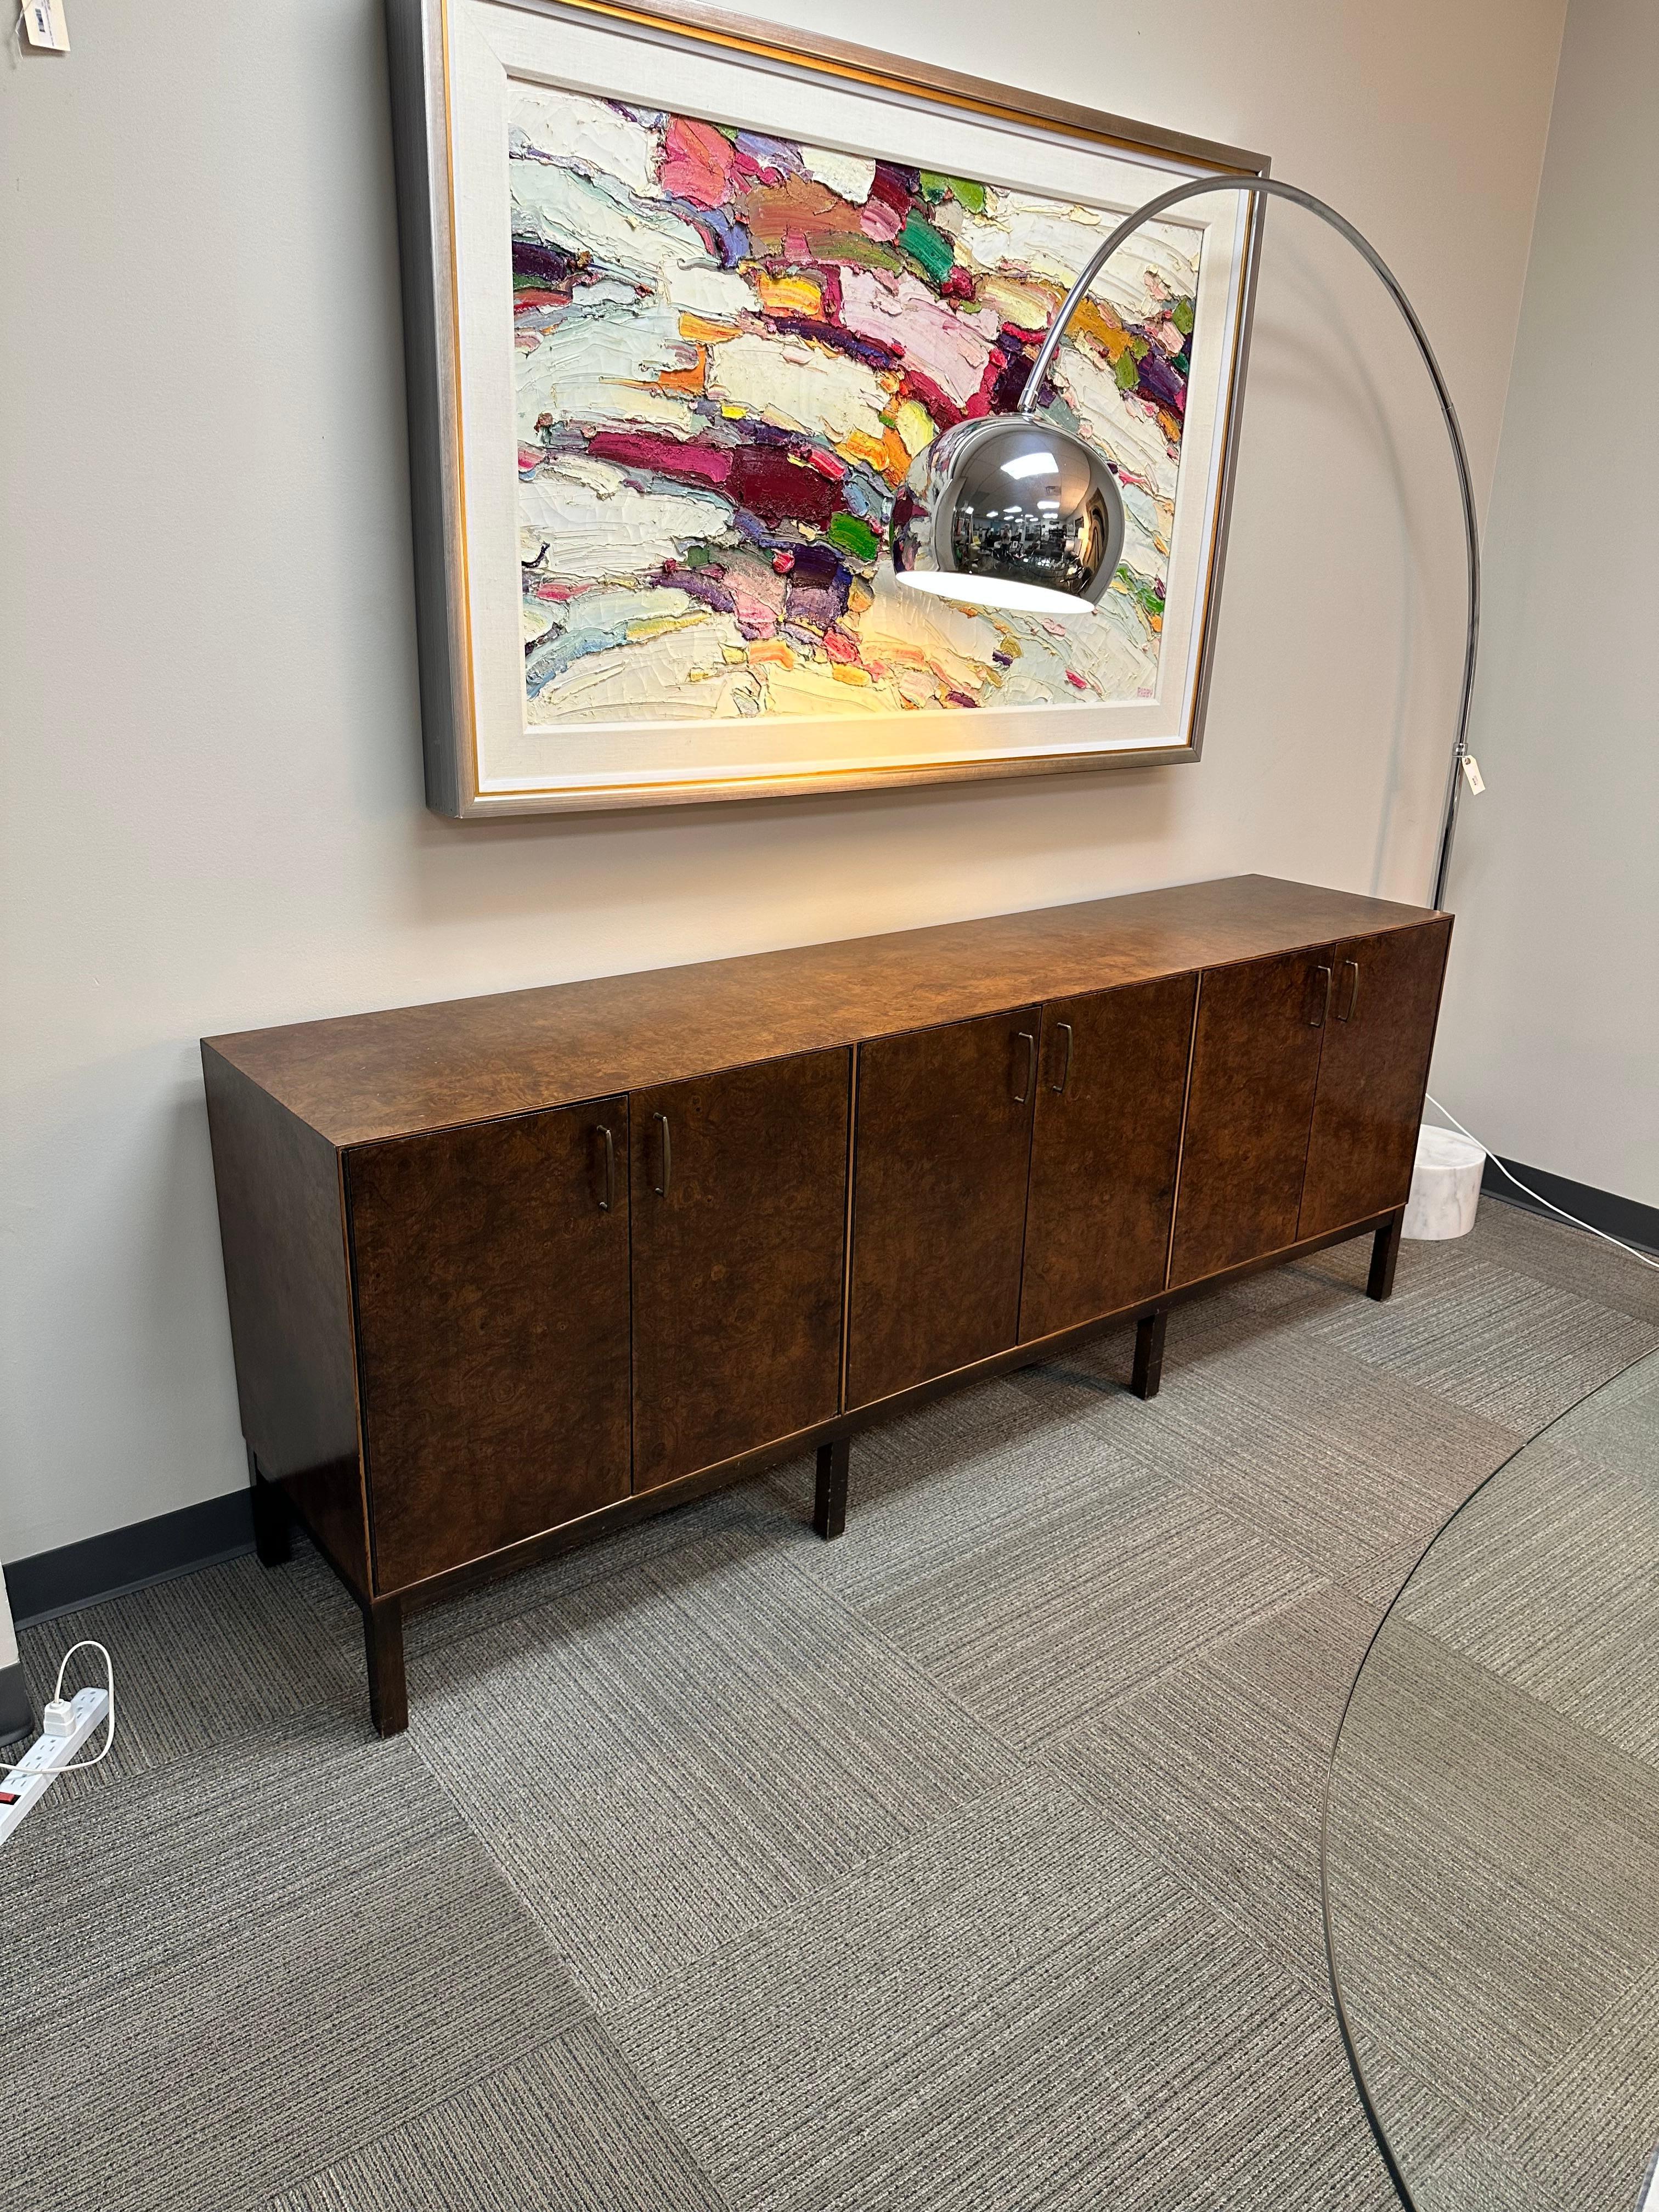 Milo Baughman for Directional Burled Walnut Sideboard or Credenza

A beautiful burled walnut sideboard or credenza by American designer Milo Baughman (1923-2003) for Directional Furniture. This is a solid and well-constructed piece, with three